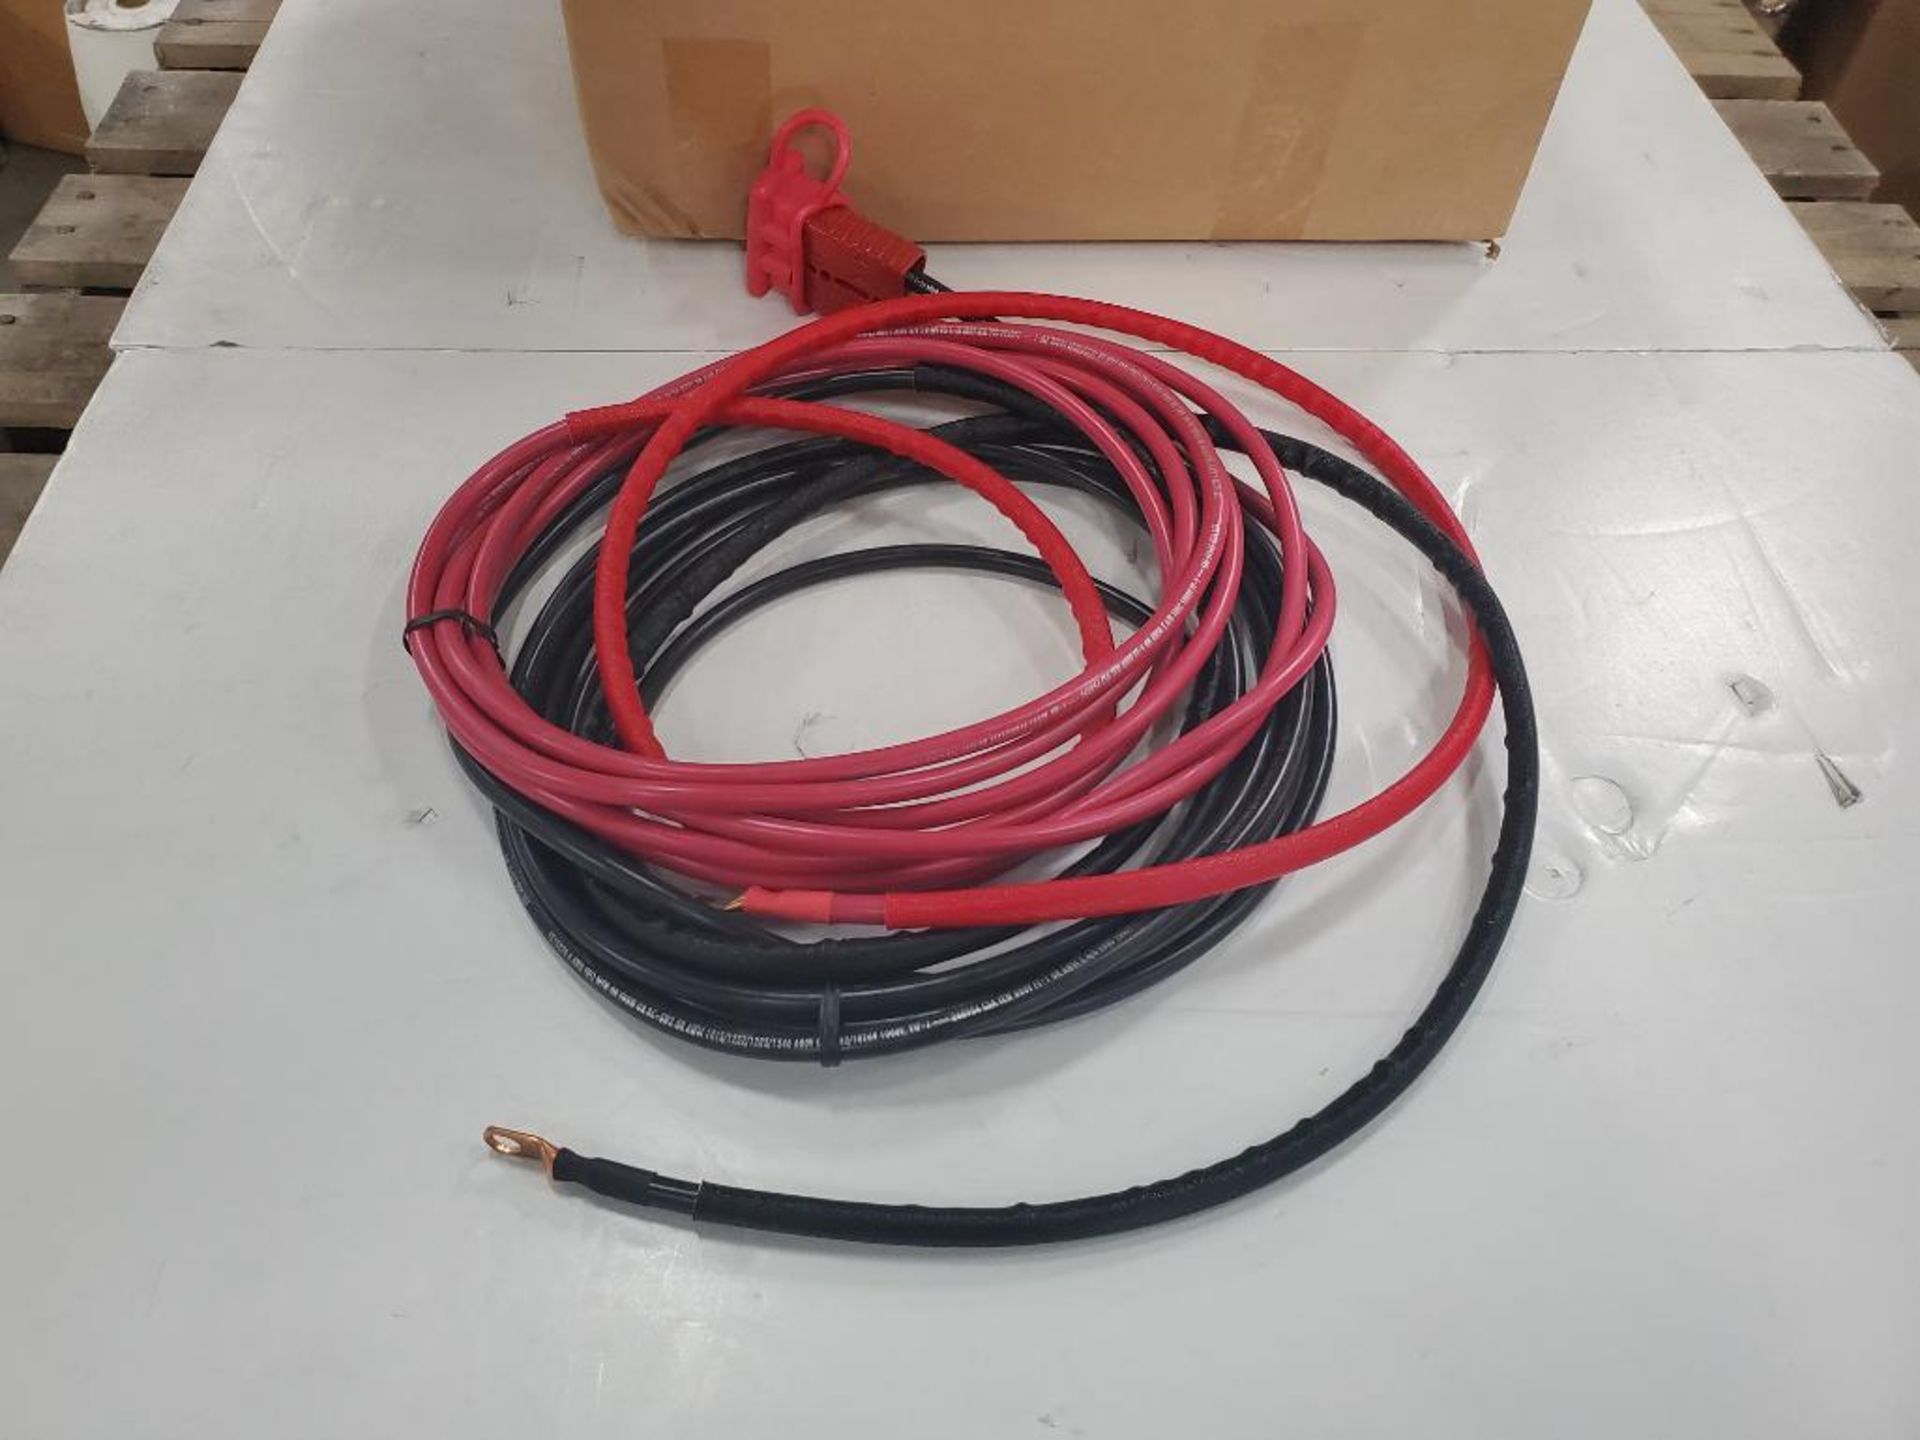 Qty 14 - Anderson 23ft battery adapter cable. RBARA23FT4-G1. 175A, 600V plug. New in box. - Image 7 of 7